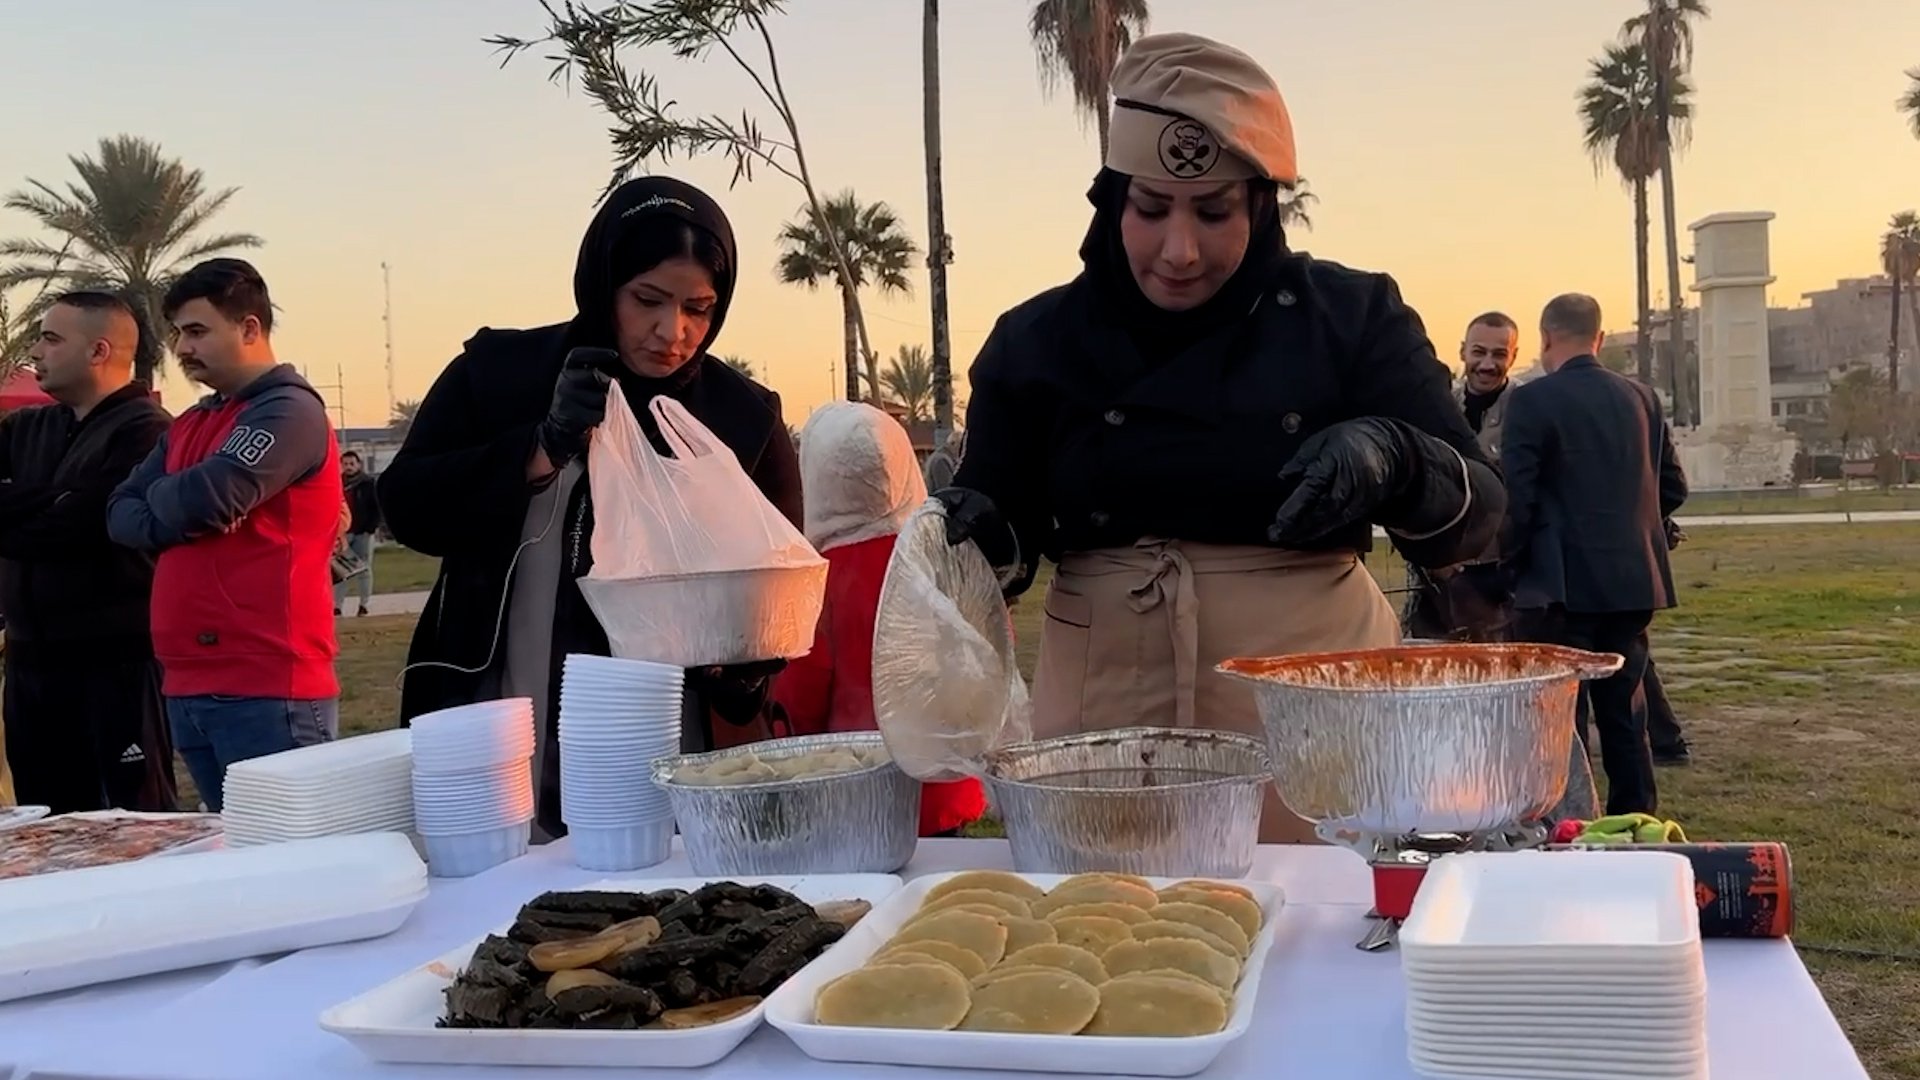 Traditional Mosul dishes on display